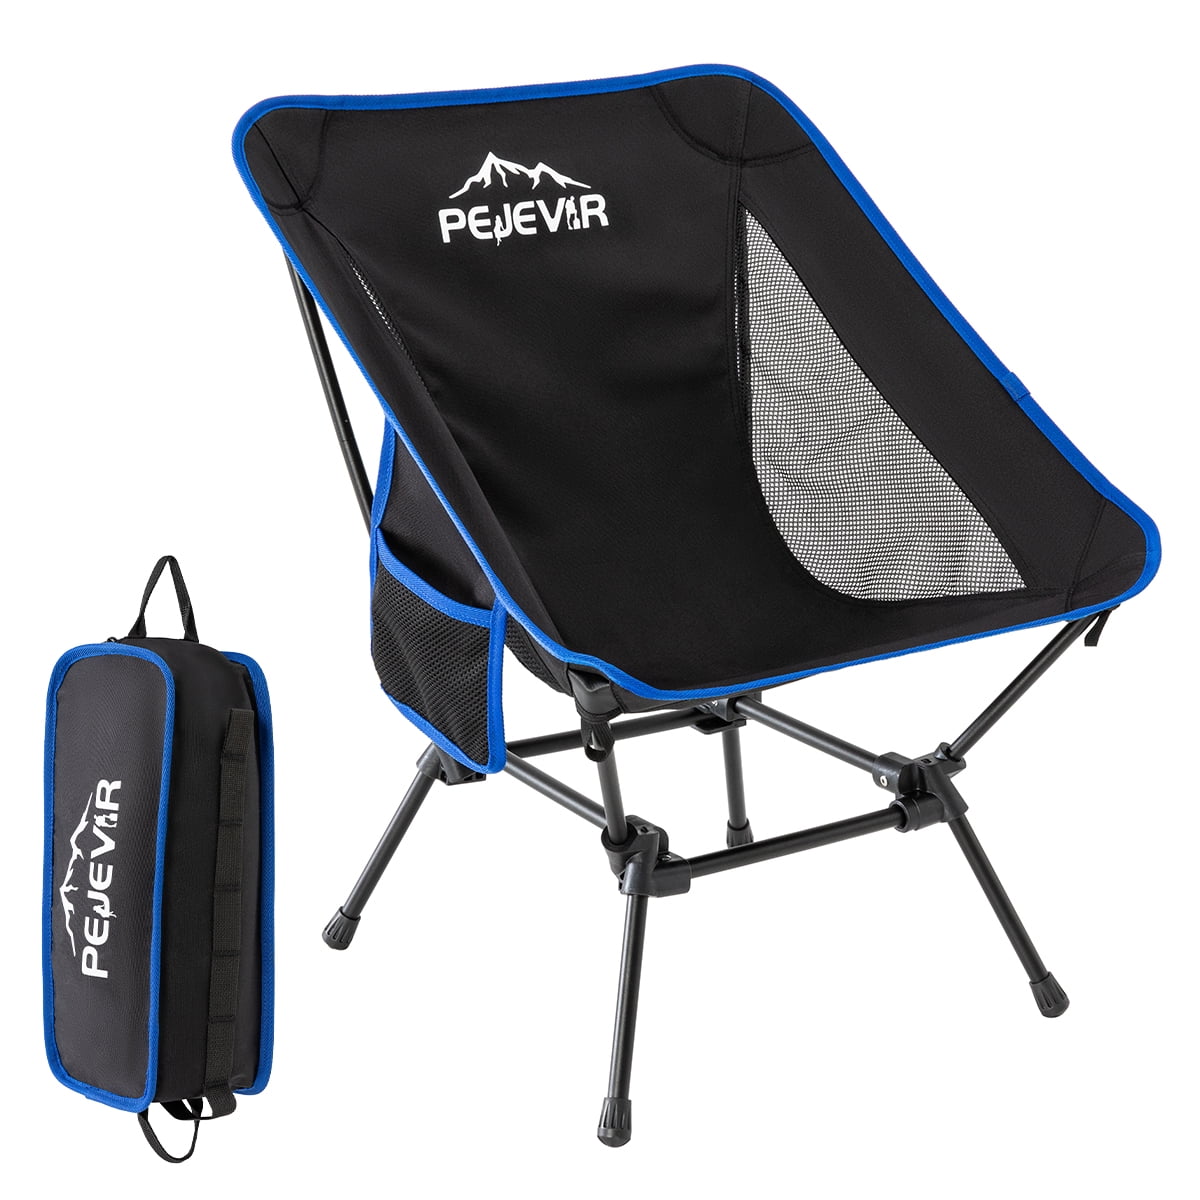 Outdoor Moon Chairs Folding Camping Barbecue Leisure Fishing